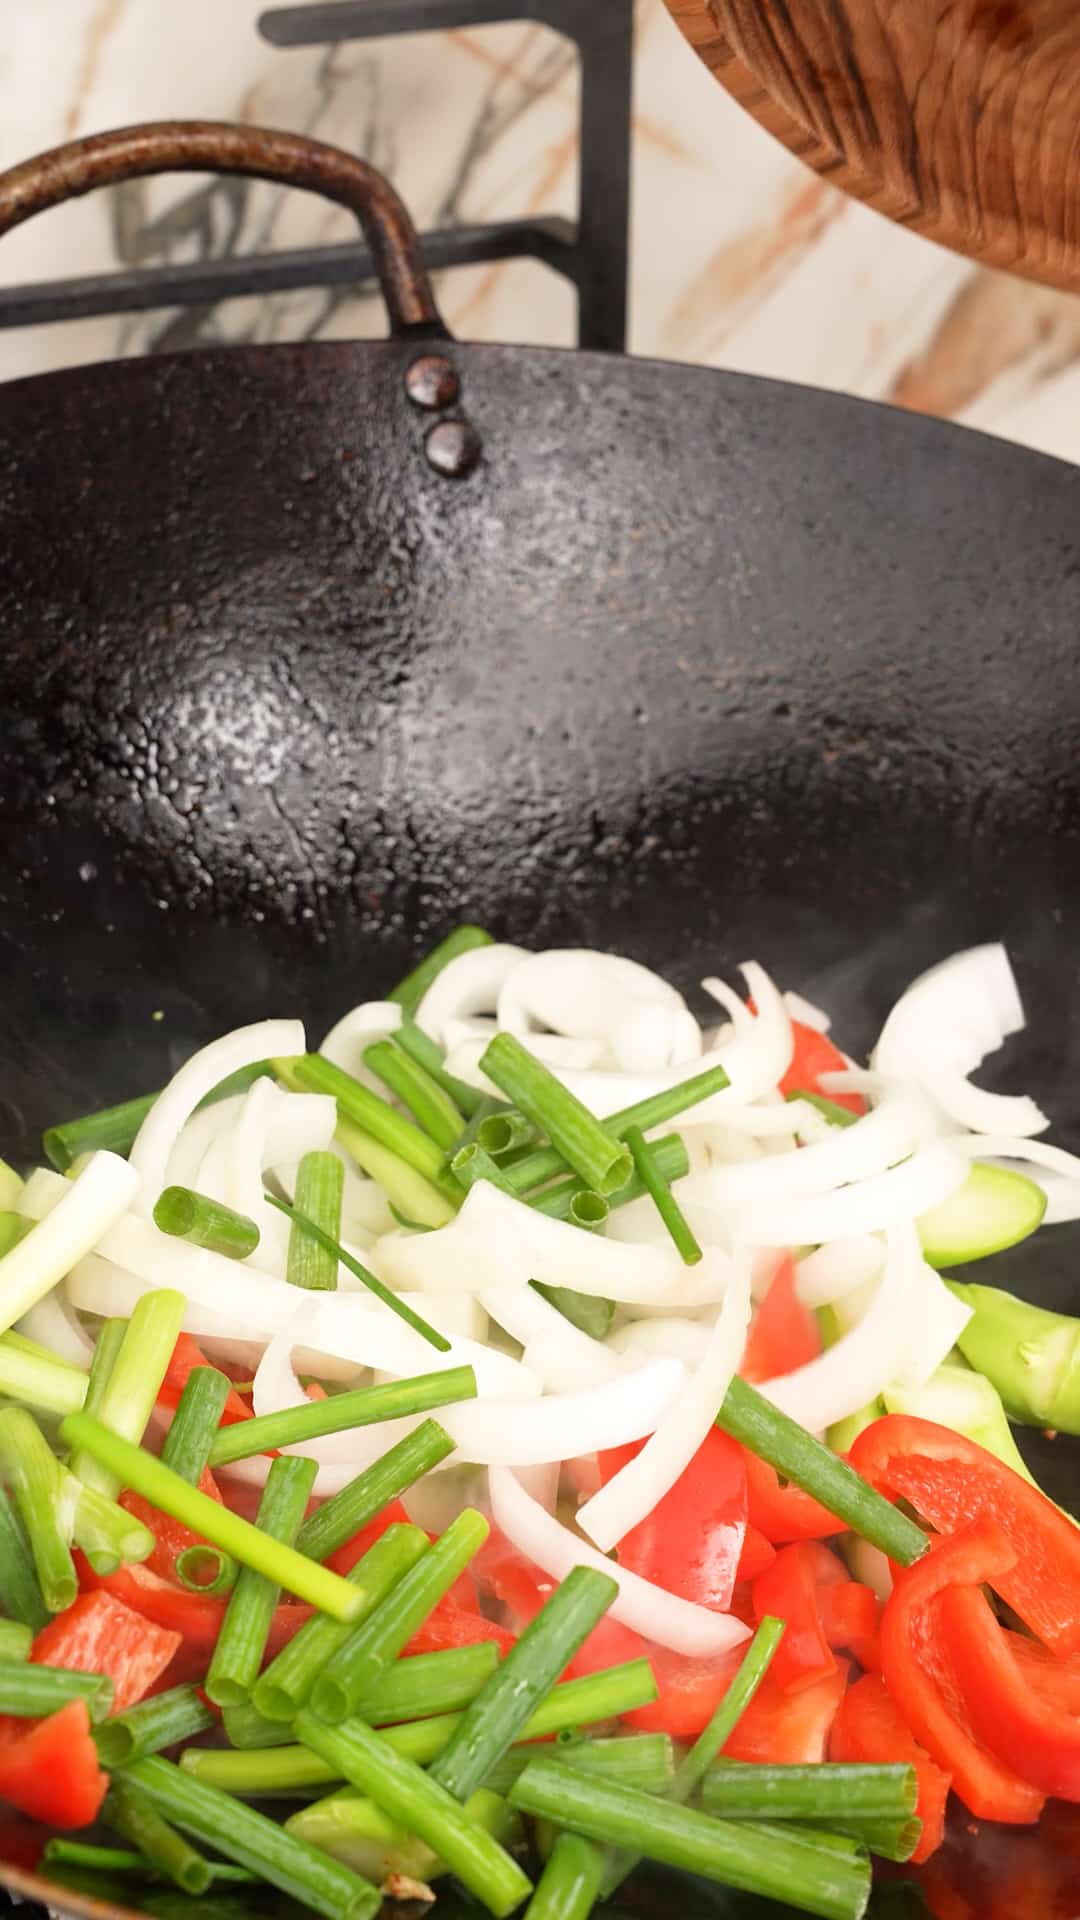 Onions and peppers being cooked in a wok.